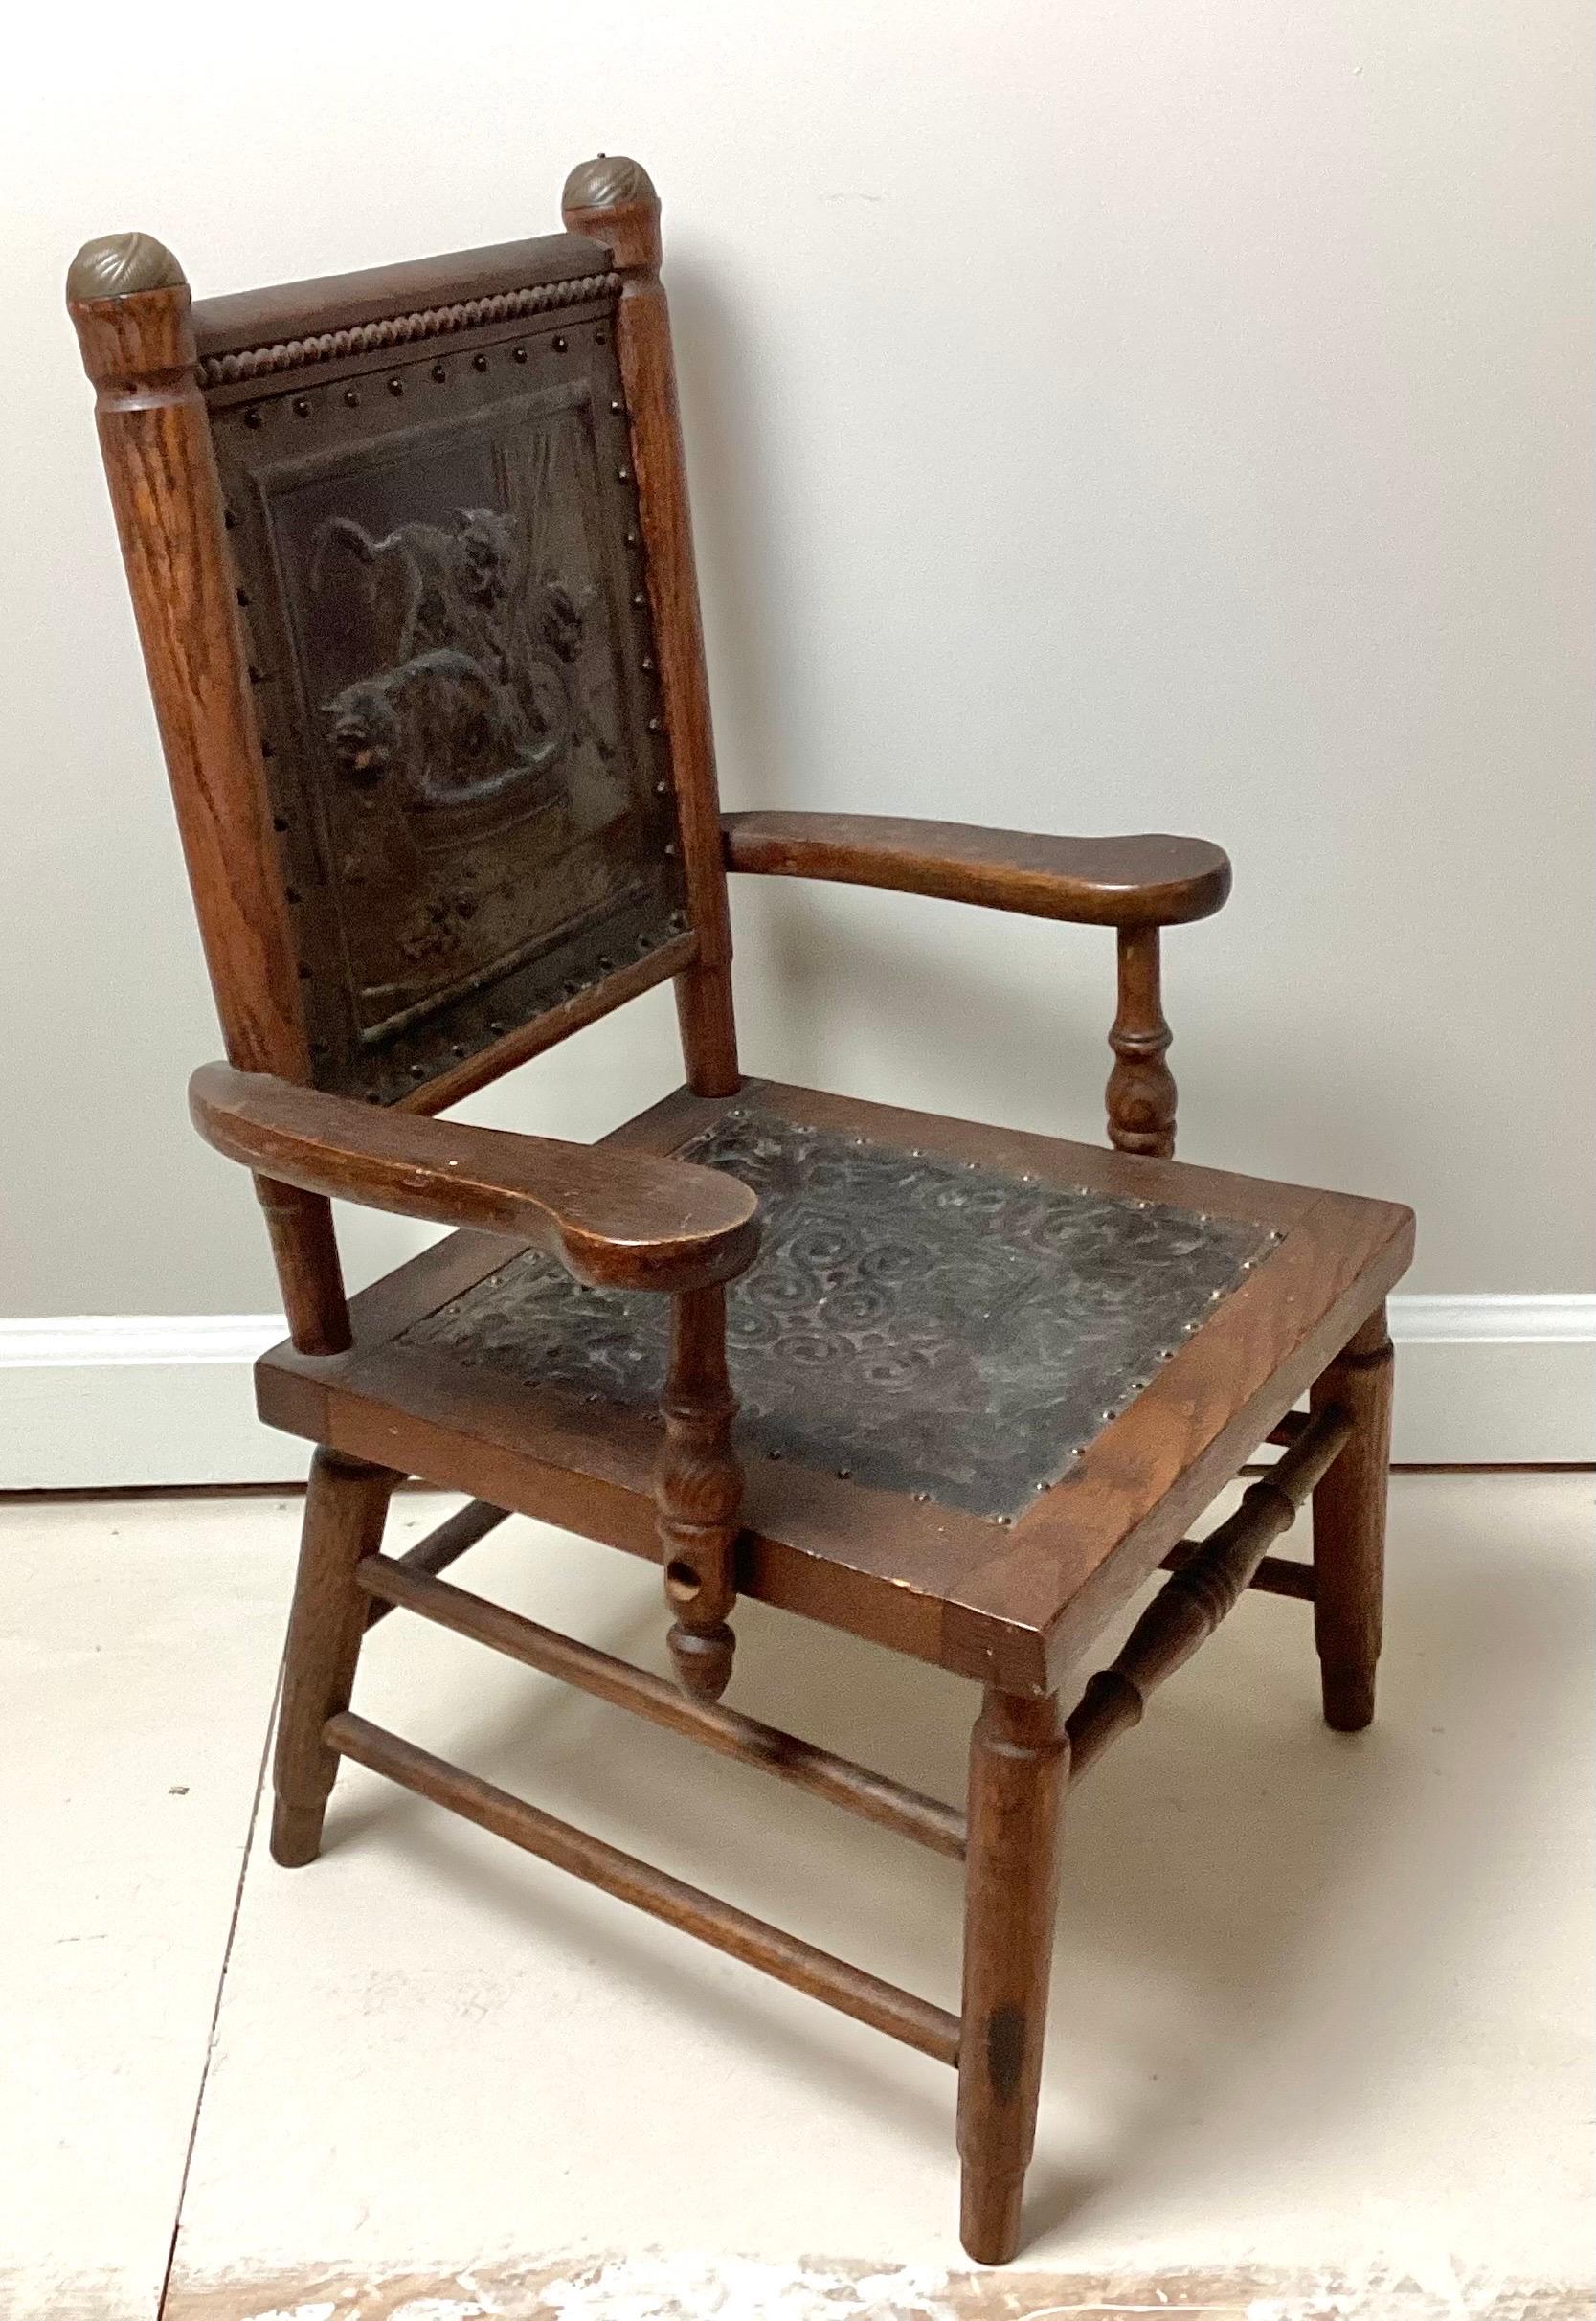 19th Century Victorian Aesthetic Movement Childs Chair with Pressed Leather Cats on Seat Back For Sale